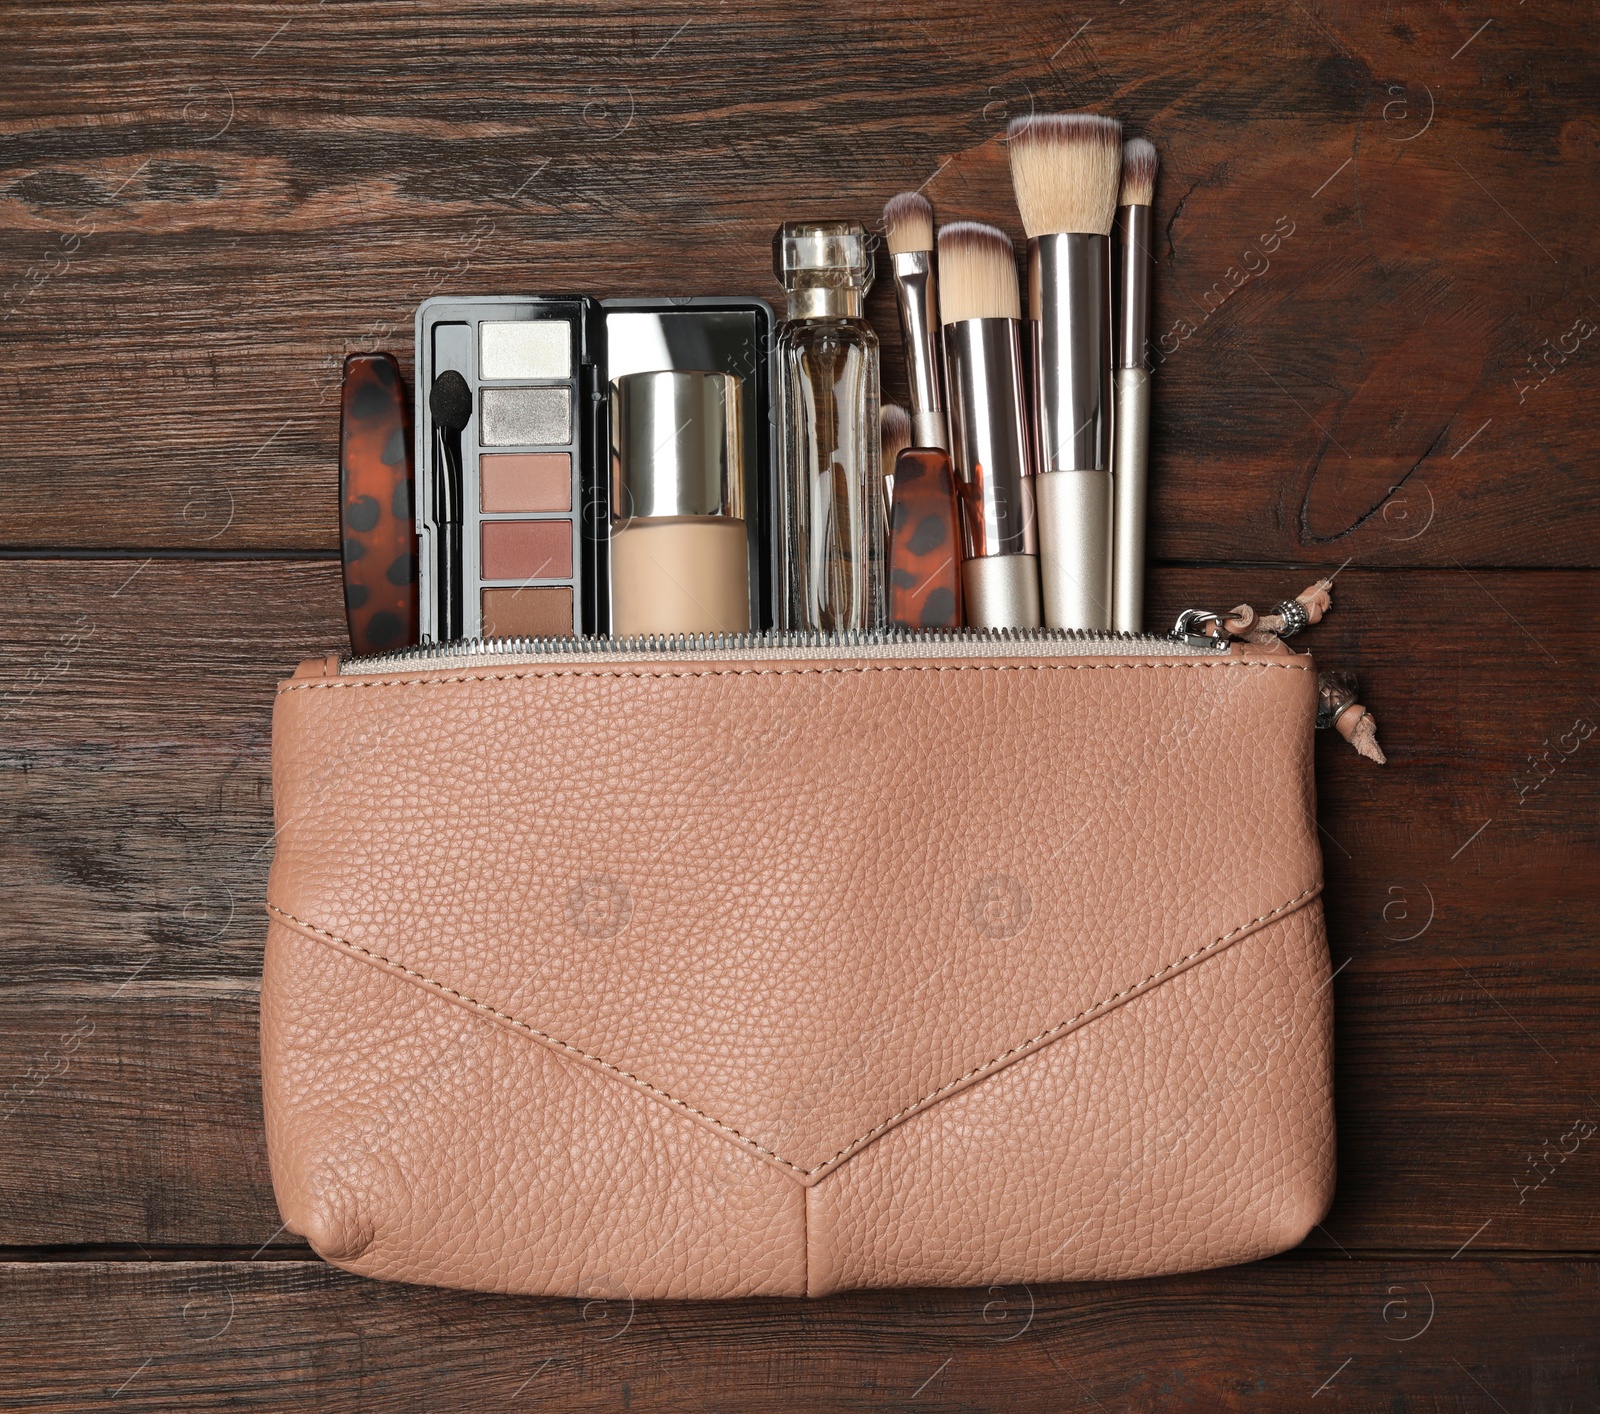 Photo of Cosmetic bag with makeup products and beauty accessories on wooden background, flat lay